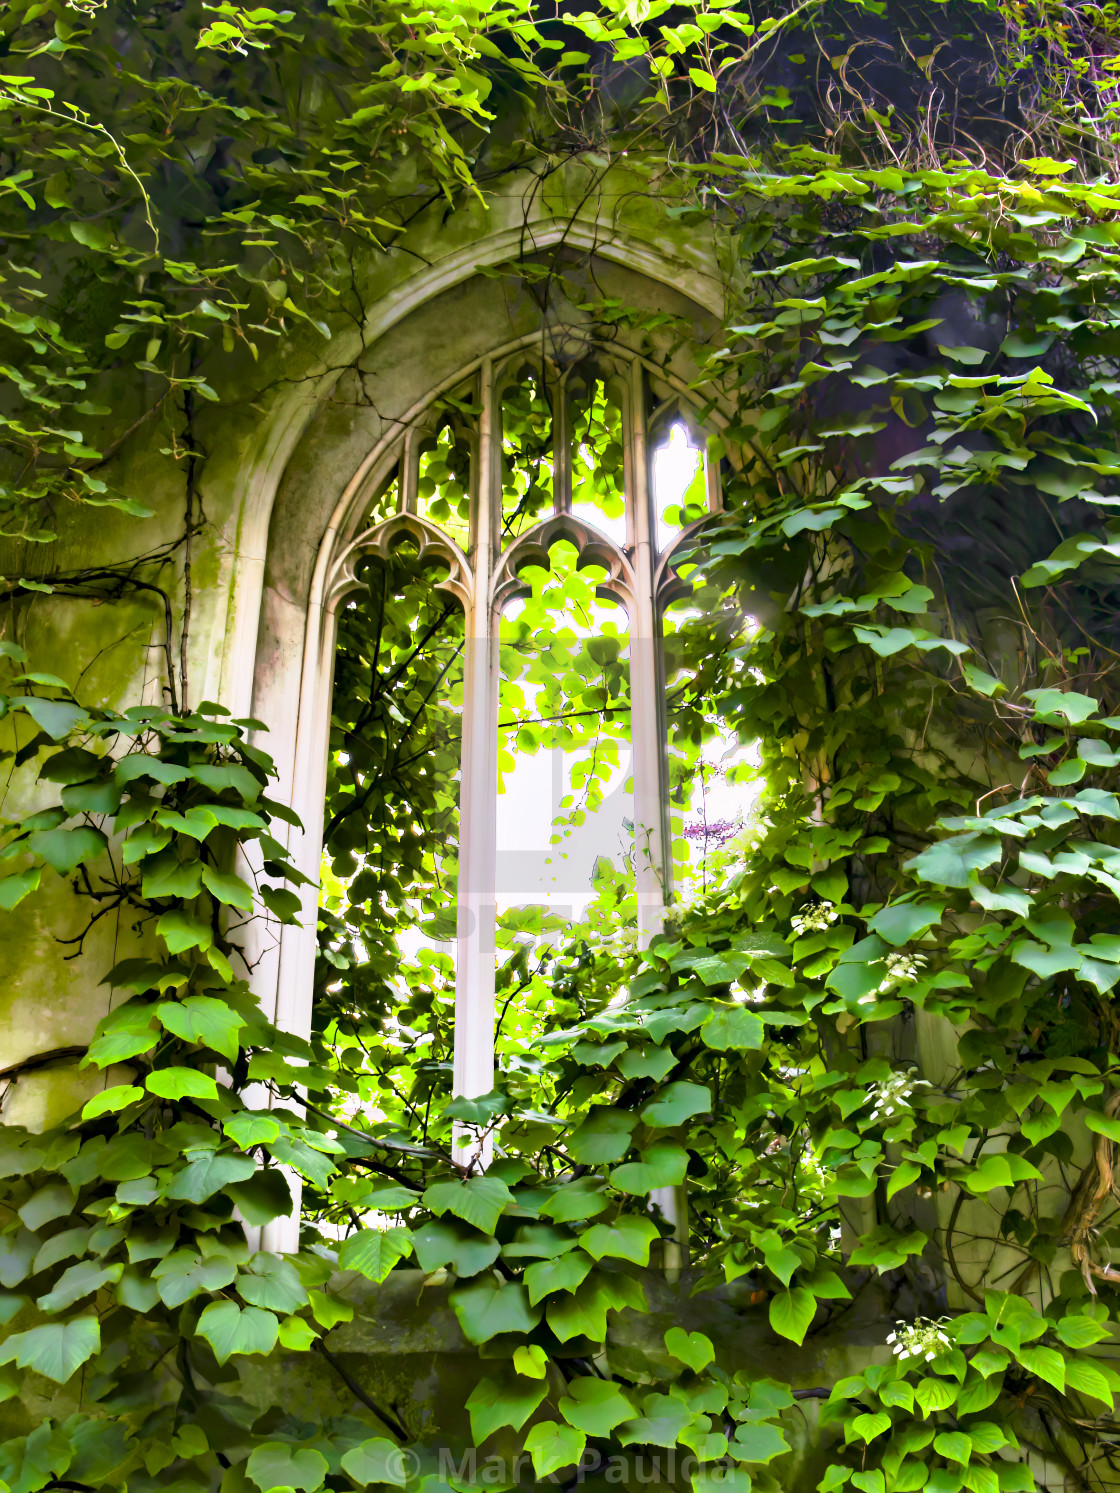 "ST DUNSTAN IN THE EAST ORNATE WINDOW" stock image